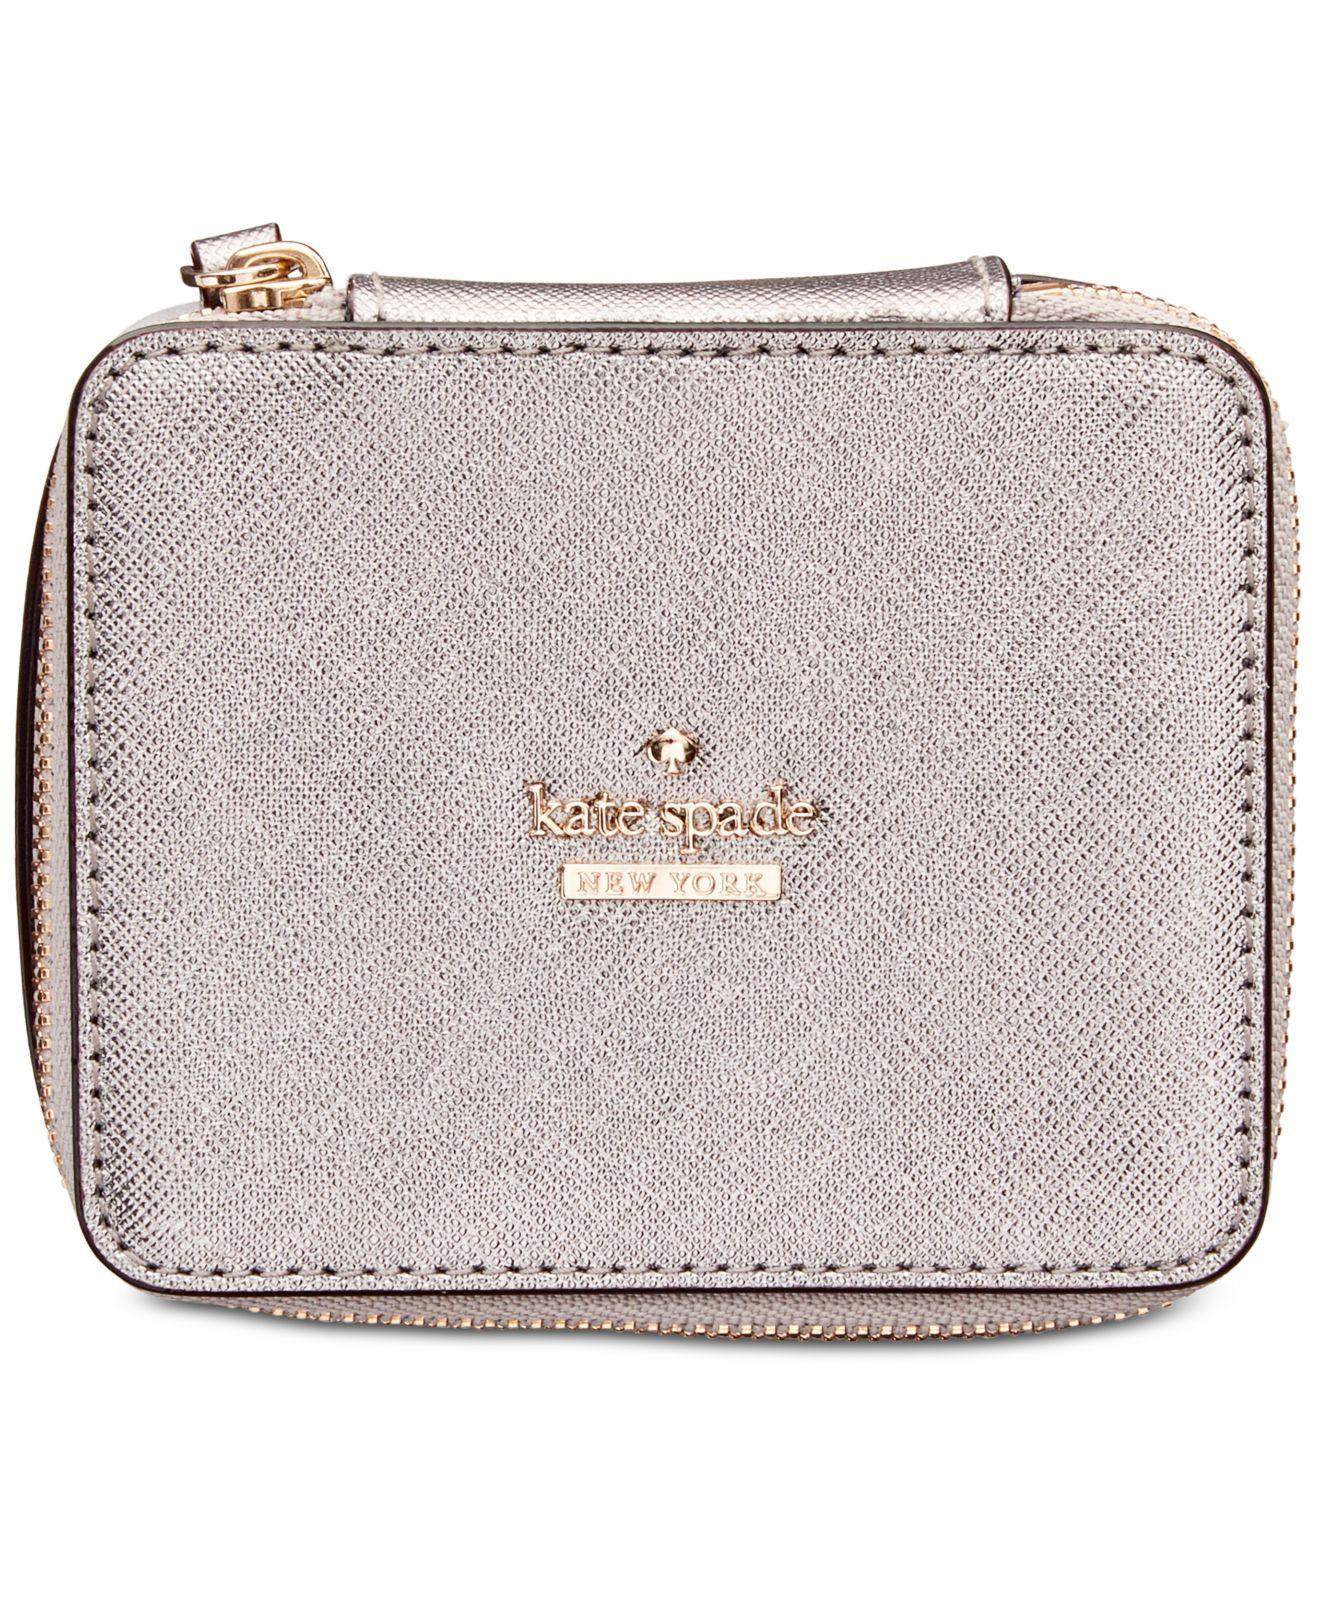 Kate Spade Synthetic Cameron Street Ollie Travel Jewelry